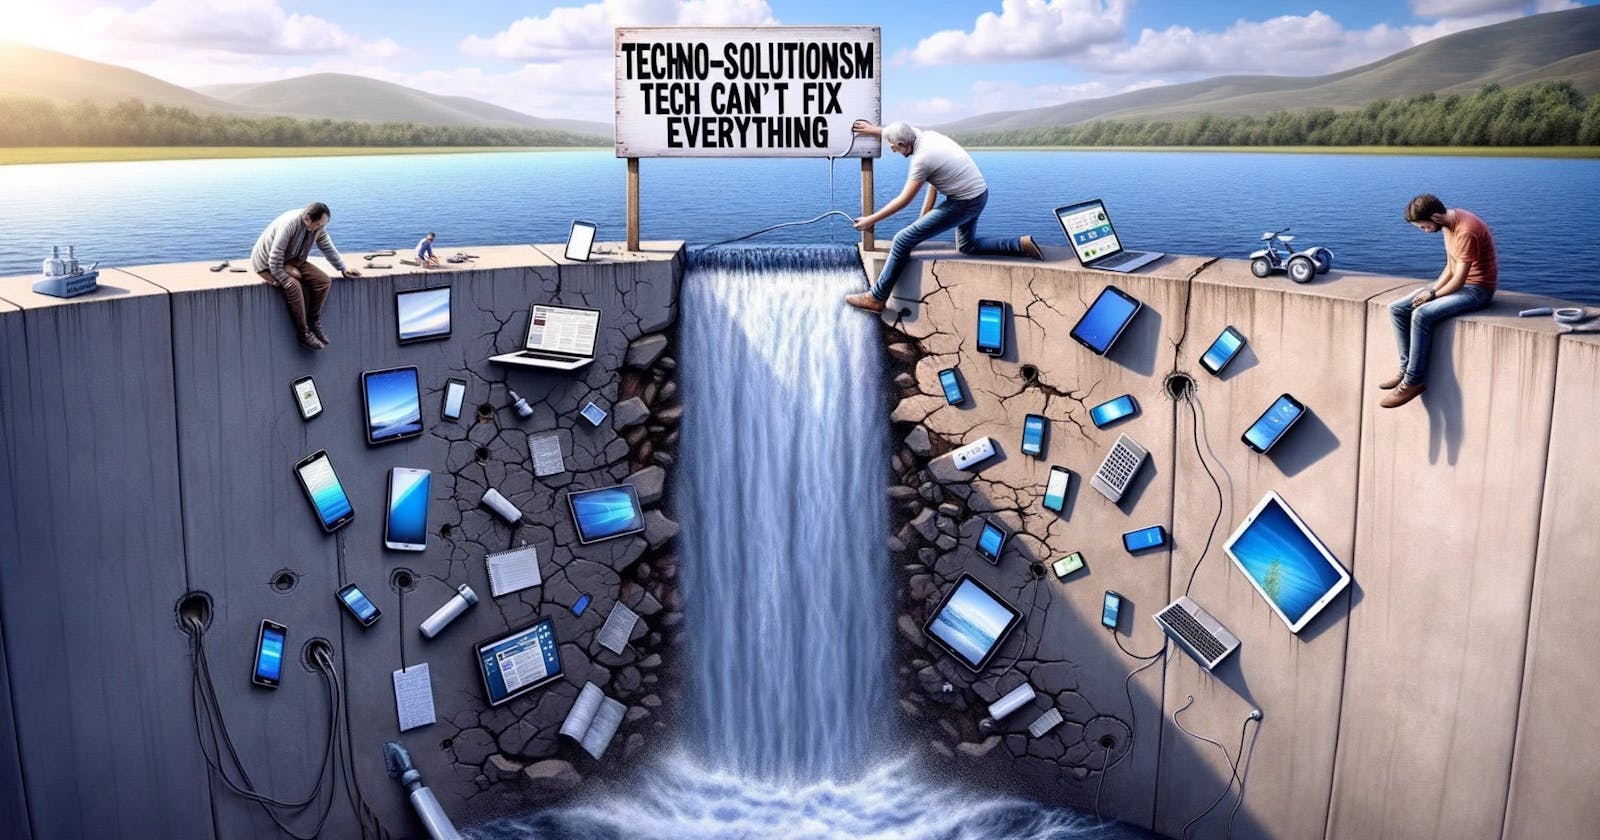 Techno-Solutionism: Tech can't fix everything